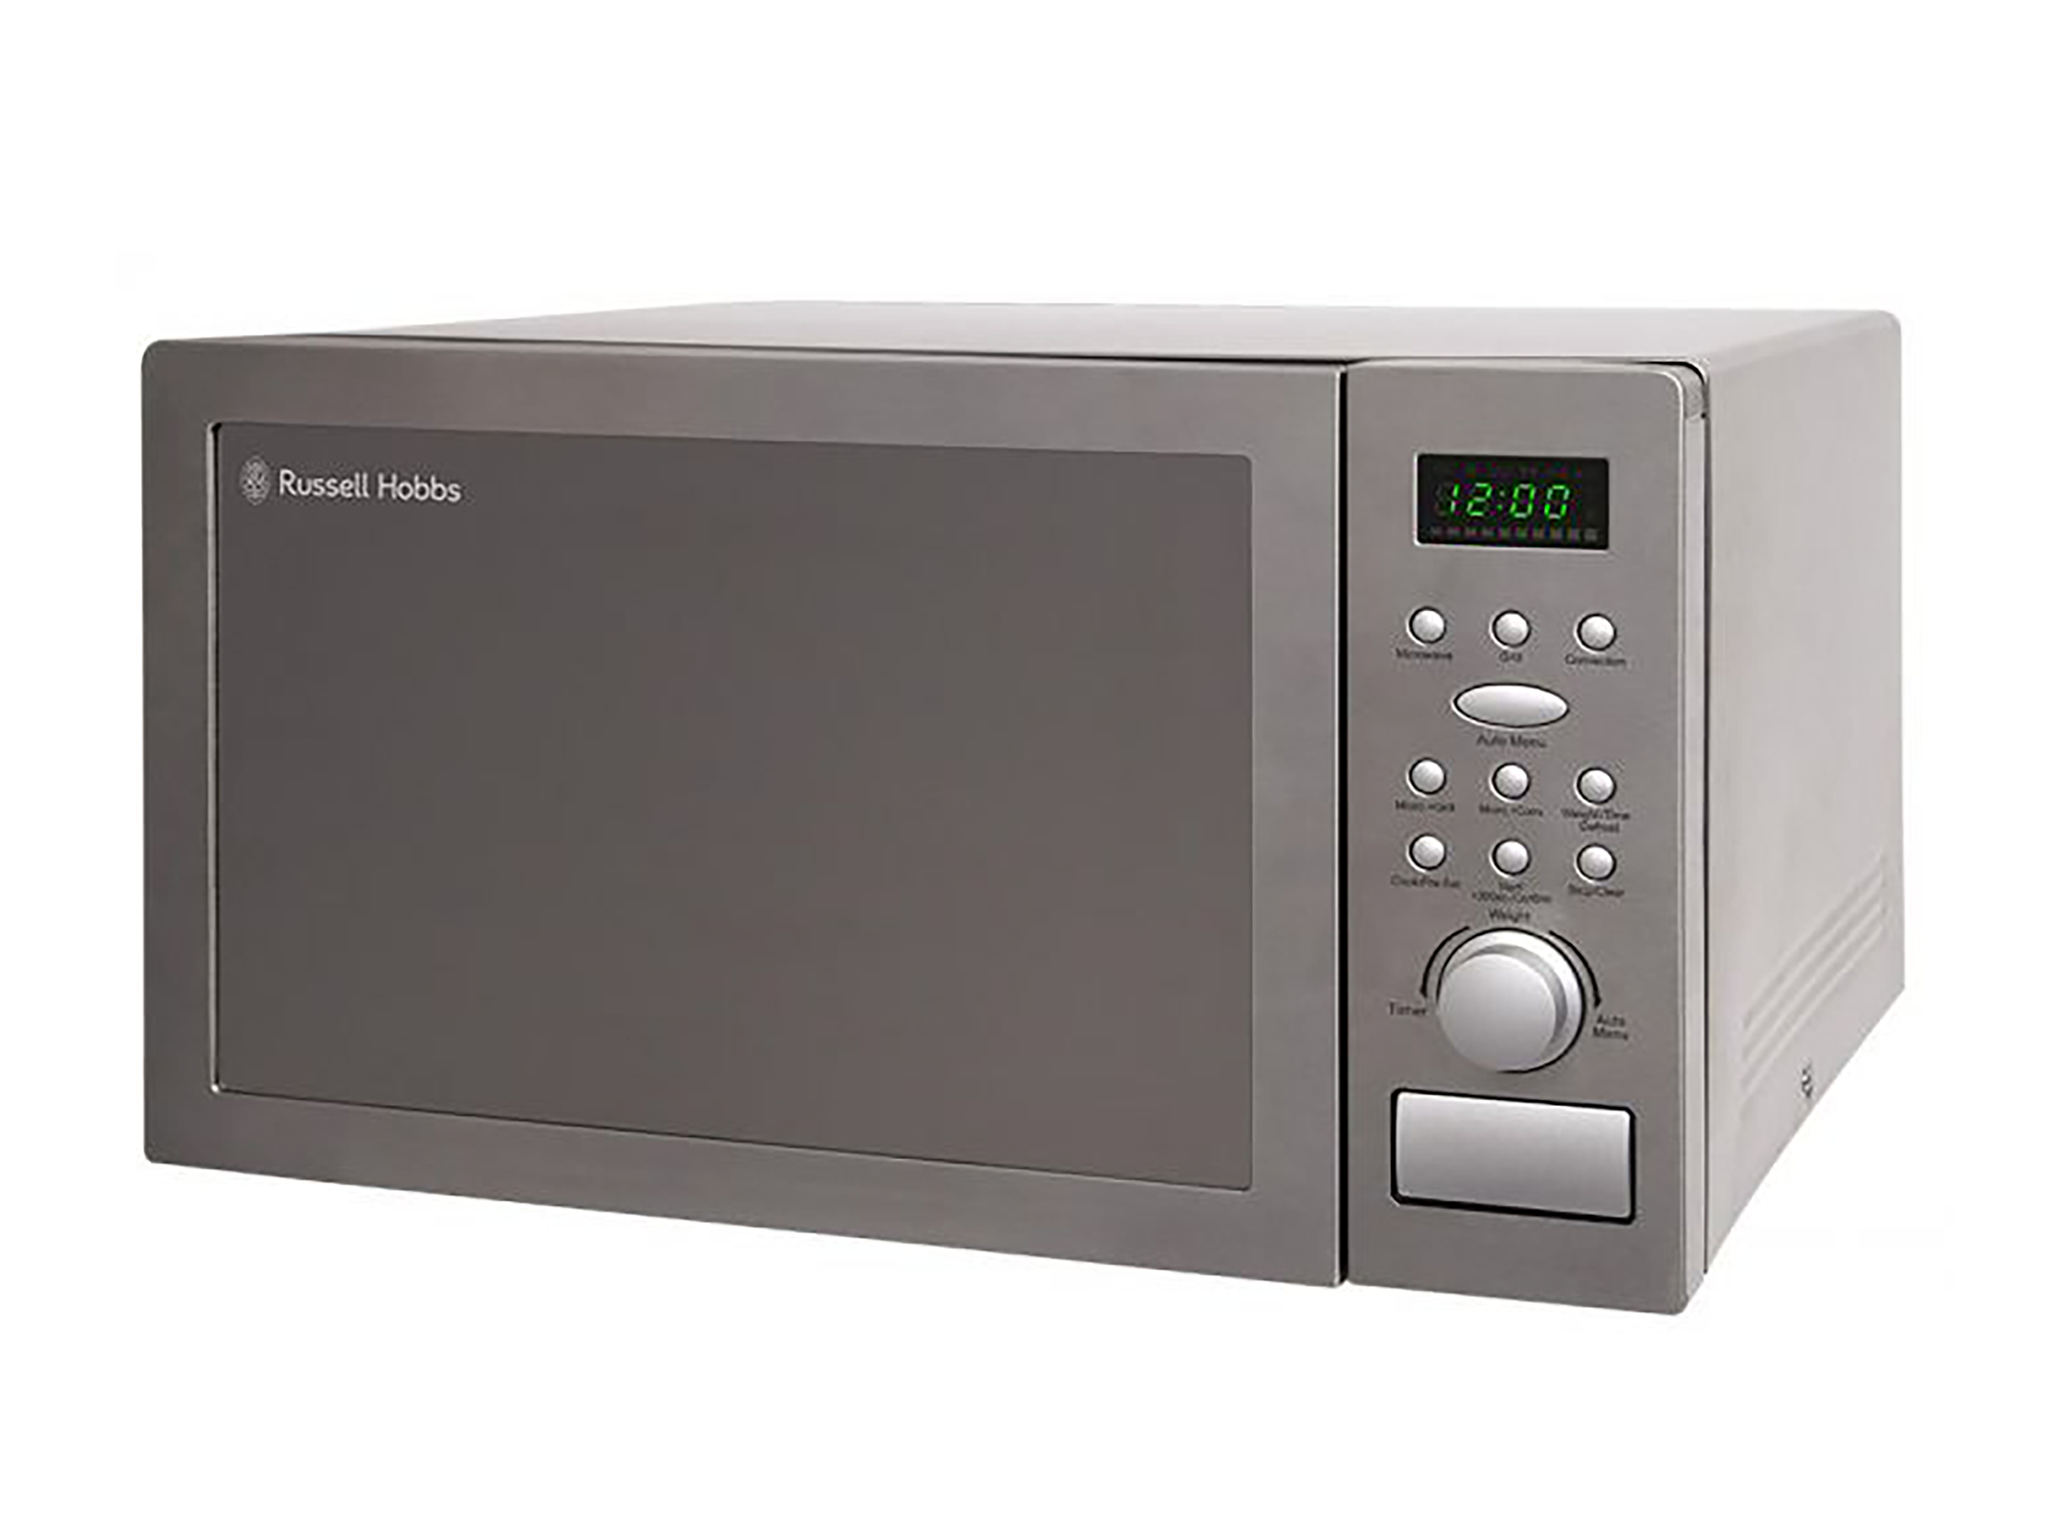 Russell Hobbs stainless steel digital combination microwave grill and oven